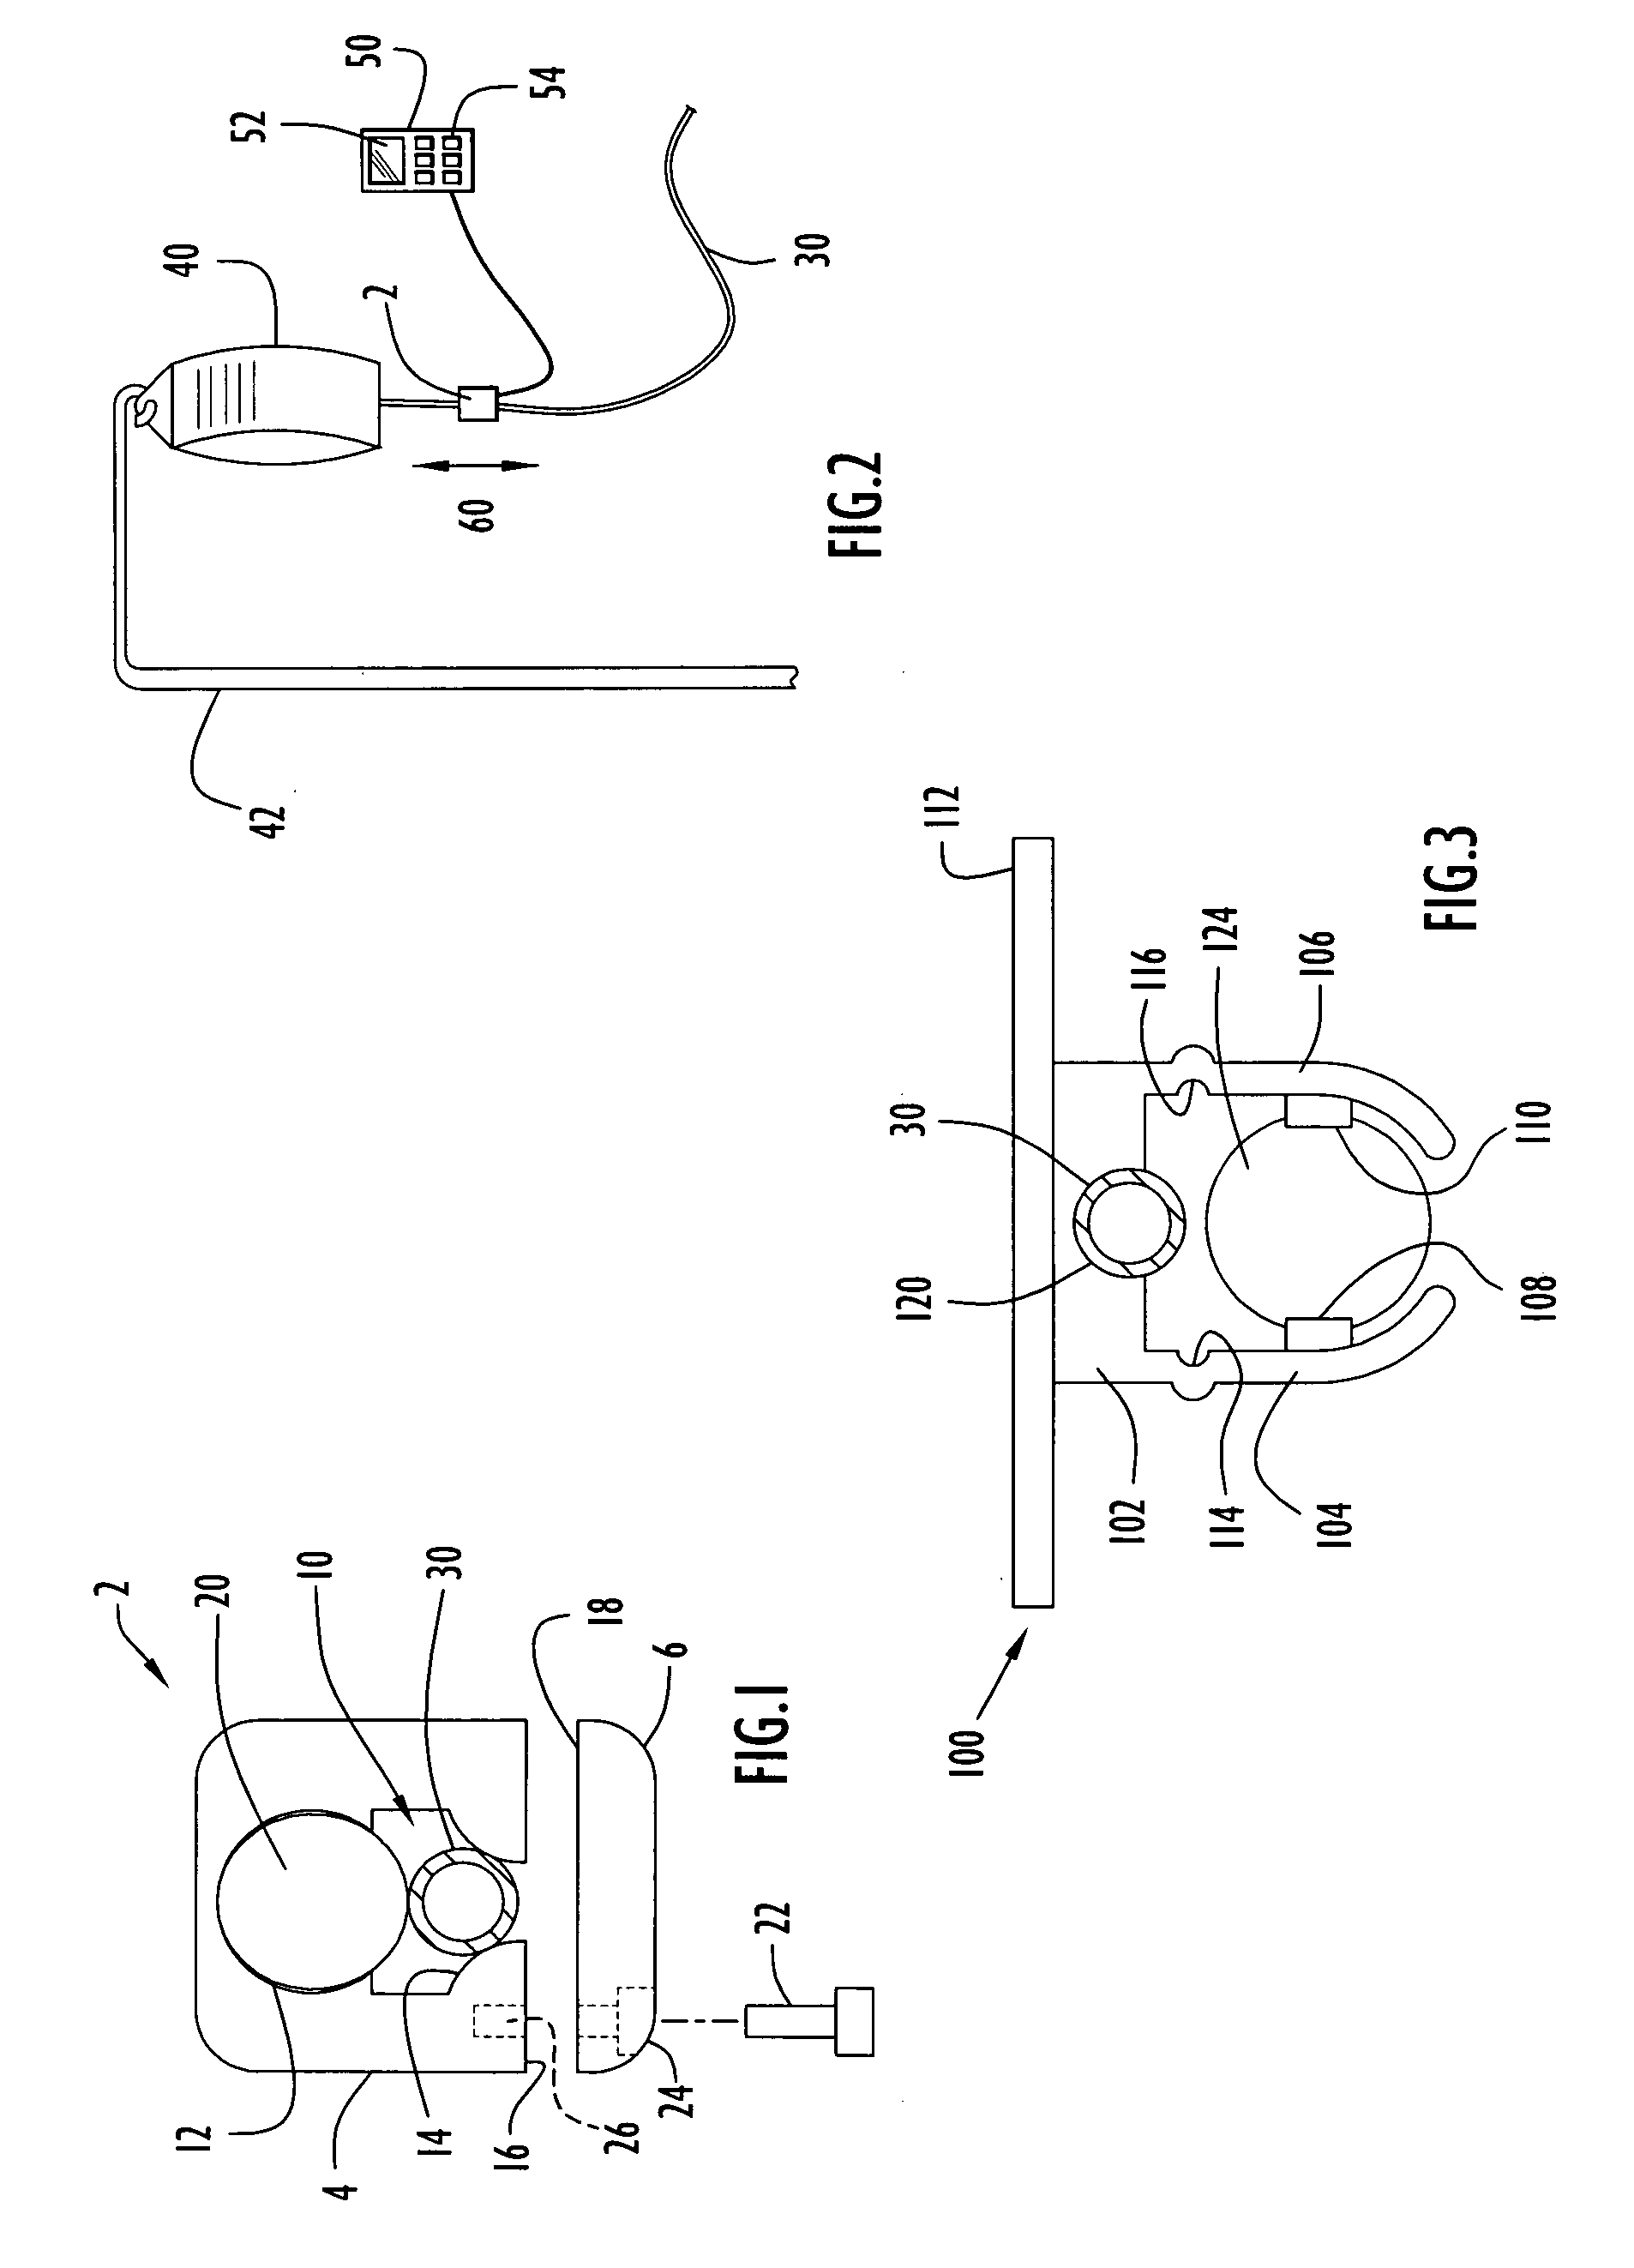 Temperature sensing device for selectively measuring temperature at desired locations along an intravenous fluid line